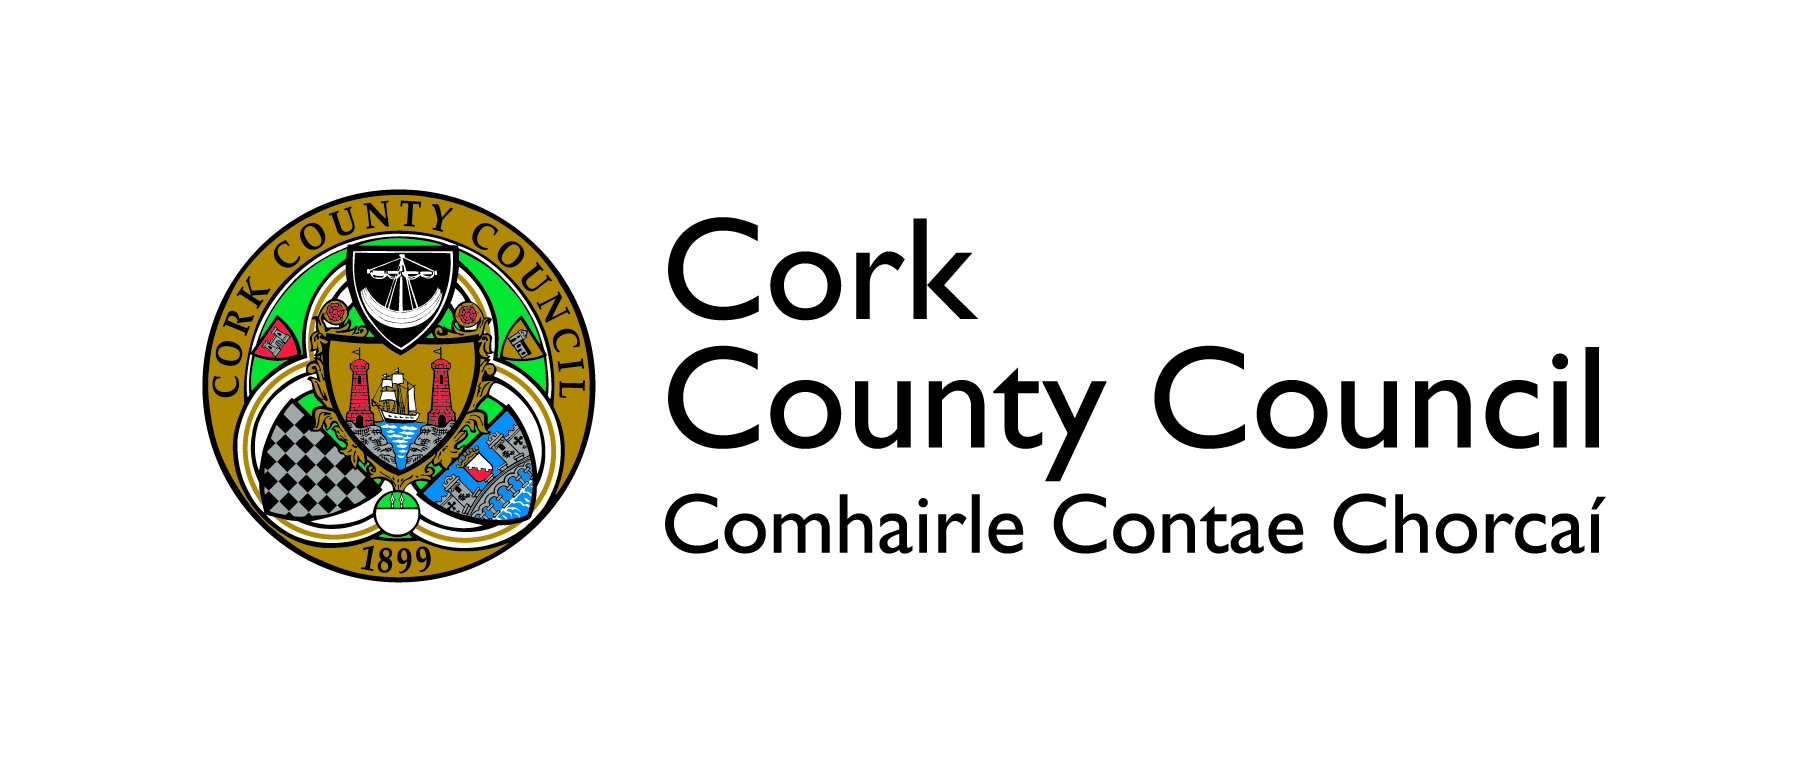 Call for Submissions for New County Cork Heritage Publication